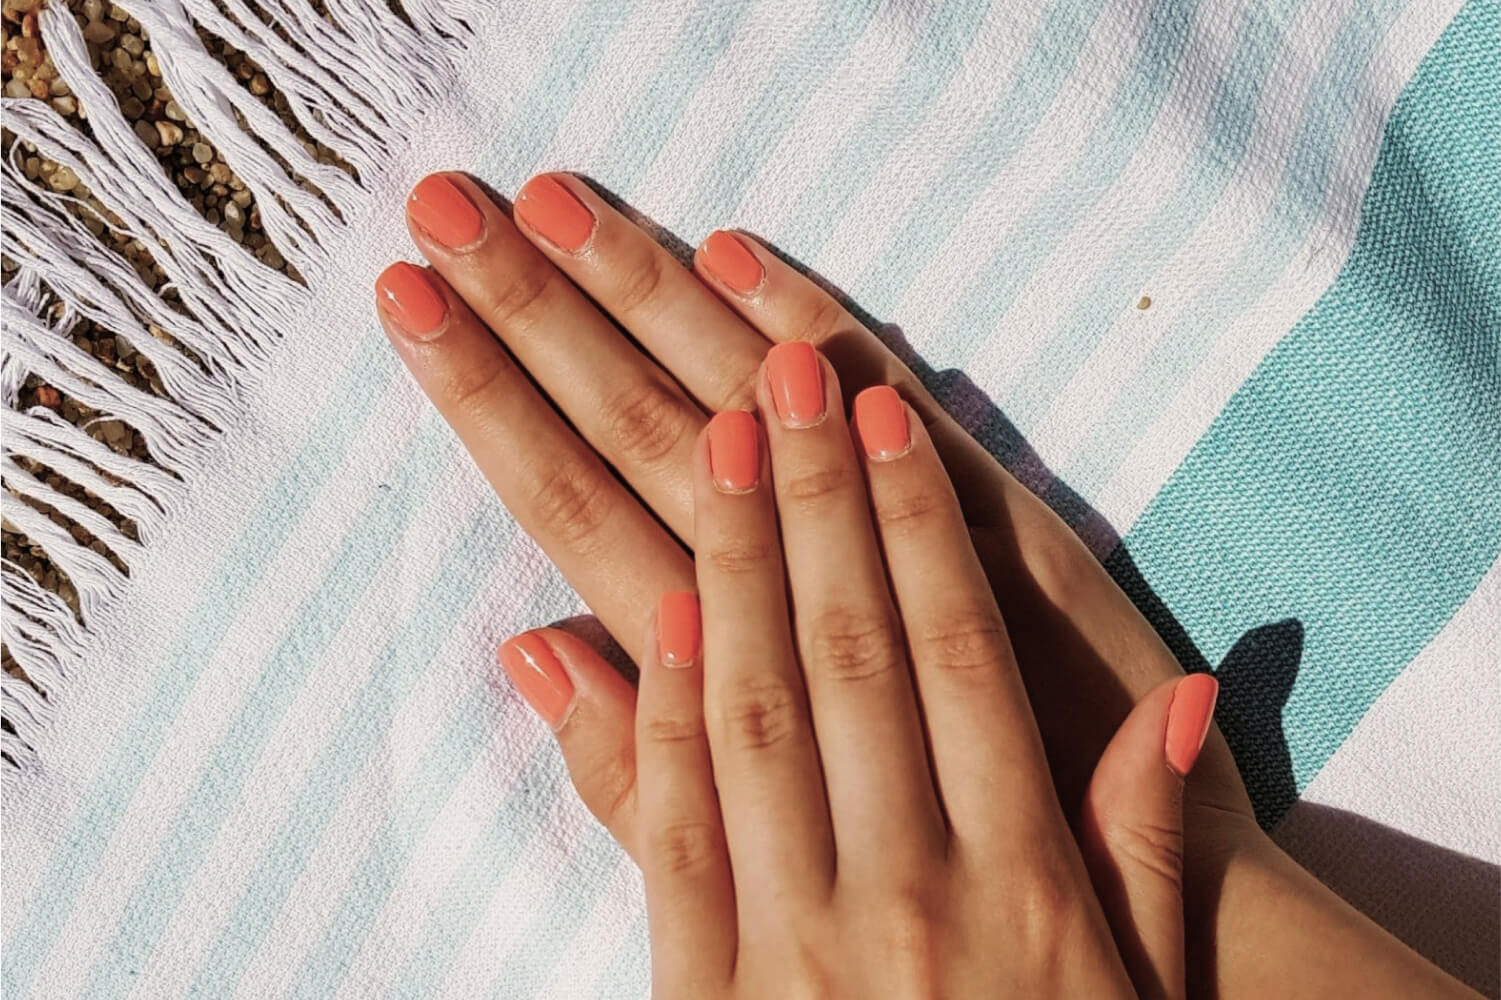 The 10 Best Gel Nail Polish Colours For Summer 2022 | Gelous